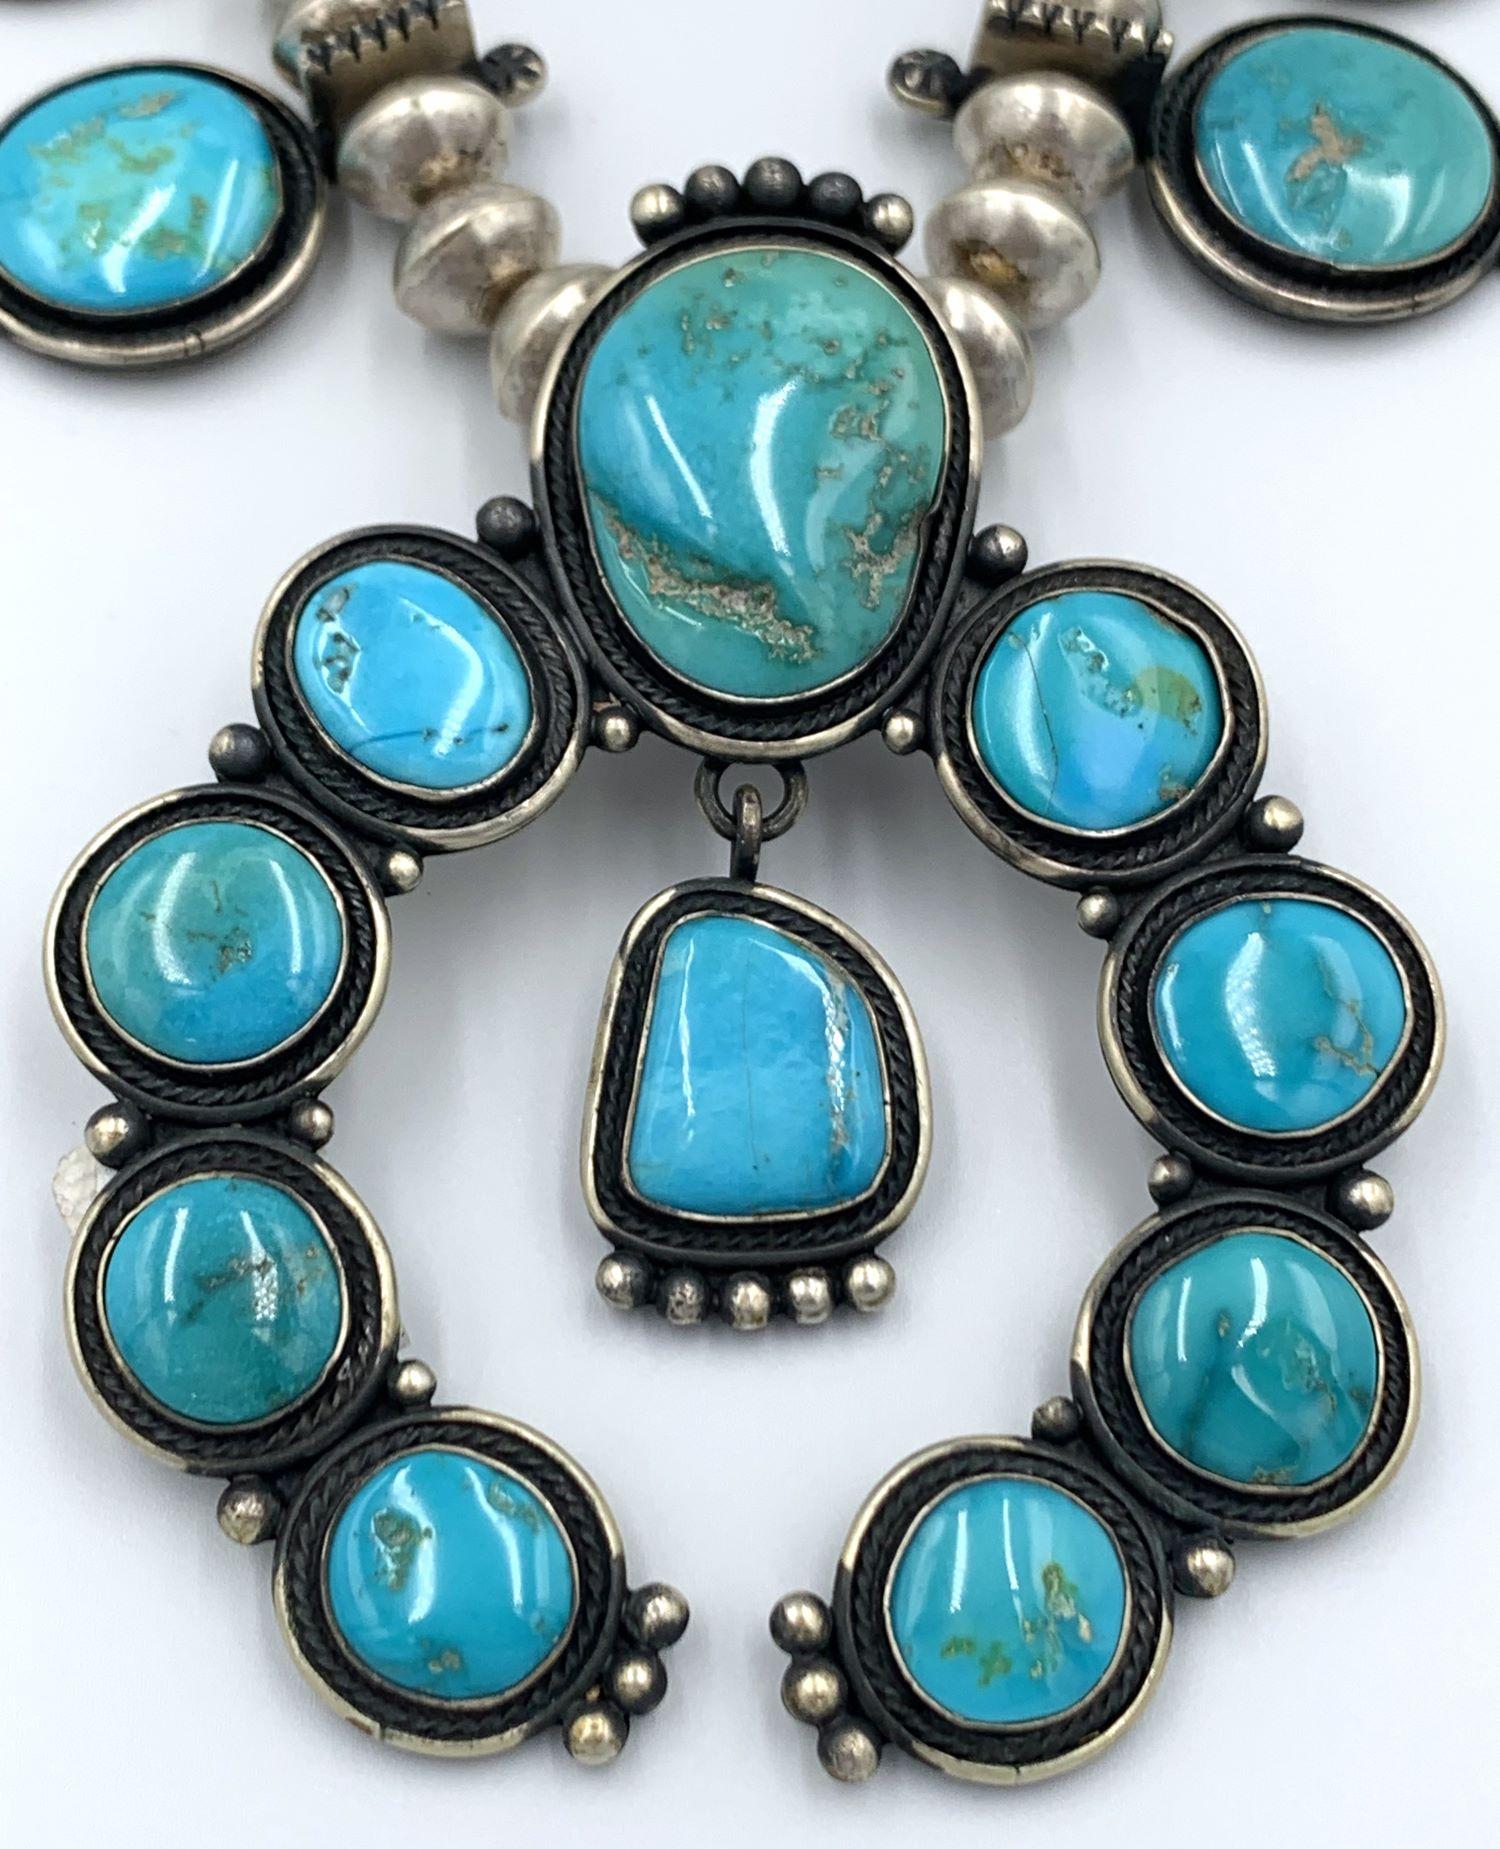 Sterling silver Navajo squash blossom necklace by award winning Navajo silversmith Tommy Jackson. The 27” necklace is comprised of 12 squash blossoms with a Blue Gem turquoise and a naja made up of 10 Blue Gem turquoise set in sterling silver. The